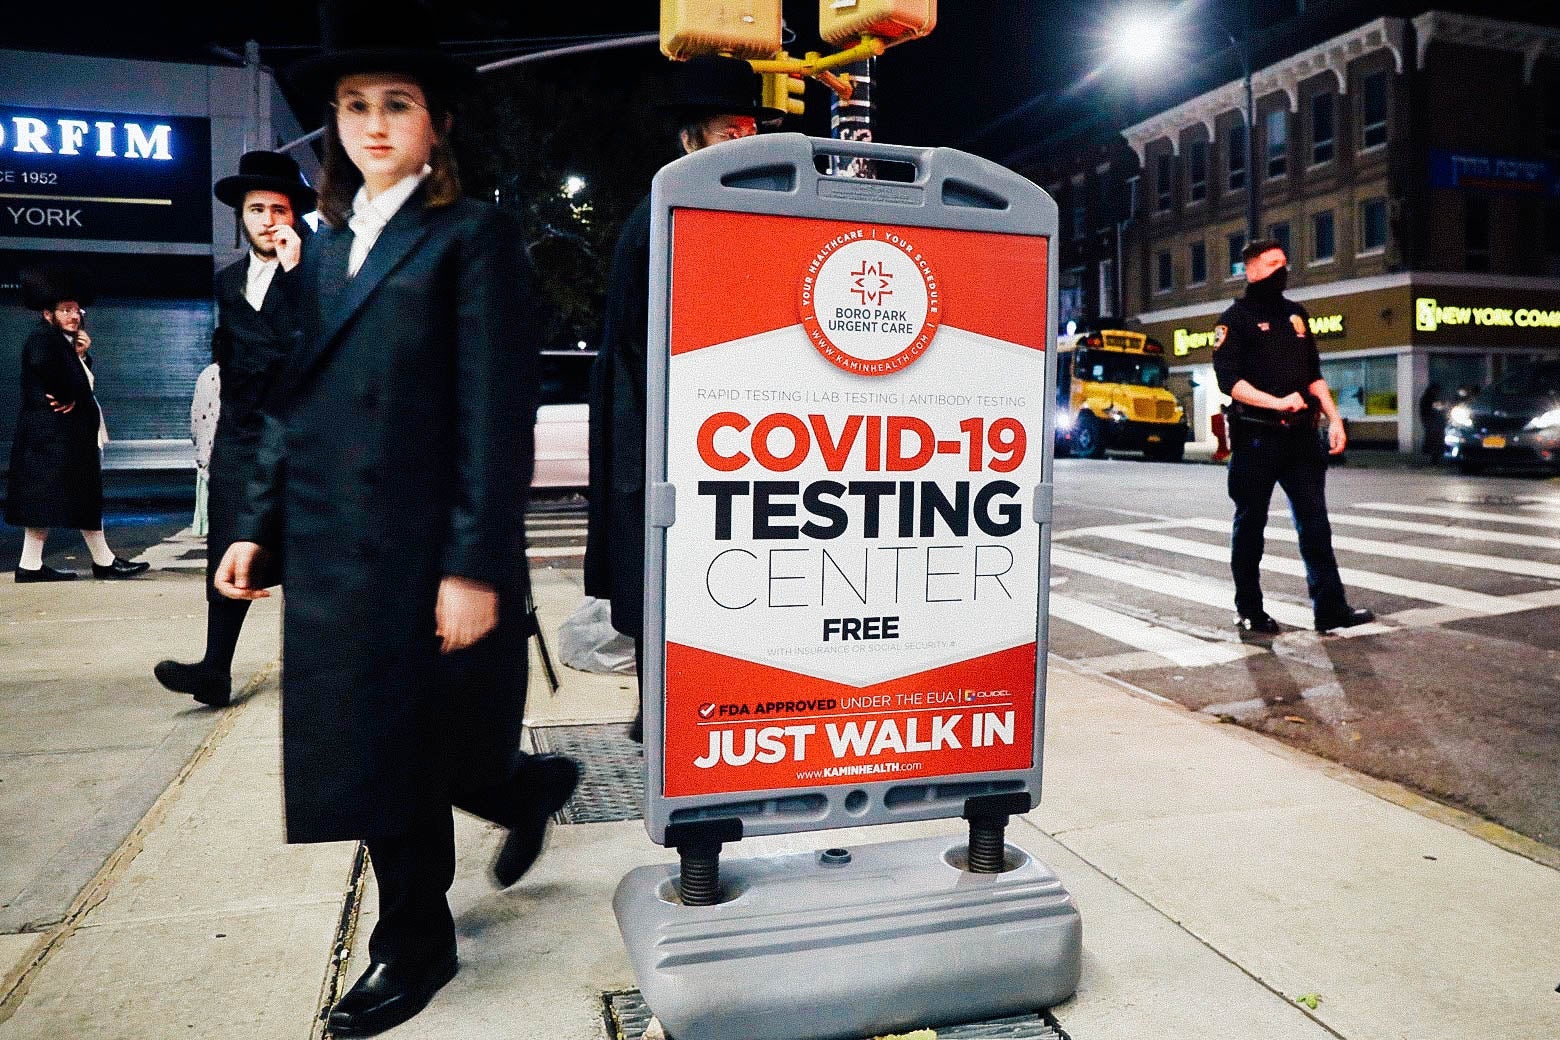 A boy in traditional Hasidic dress walks by a sign that says COVID-19 Testing Center.